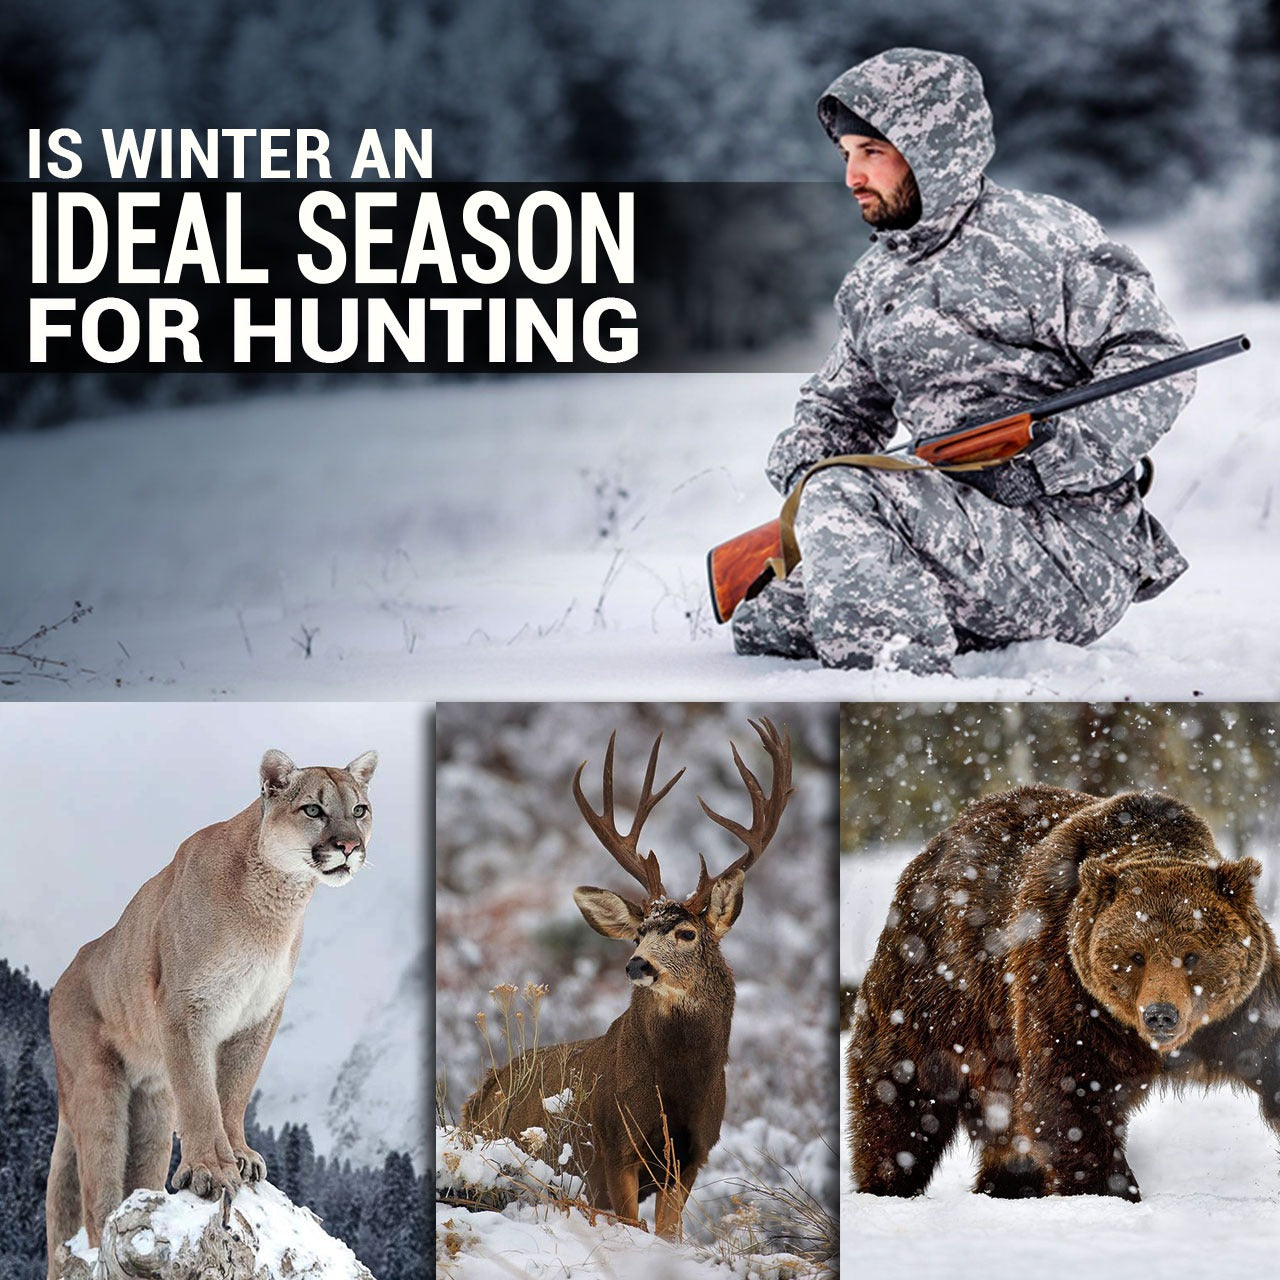 Is Winter an Ideal Season For Hunting?